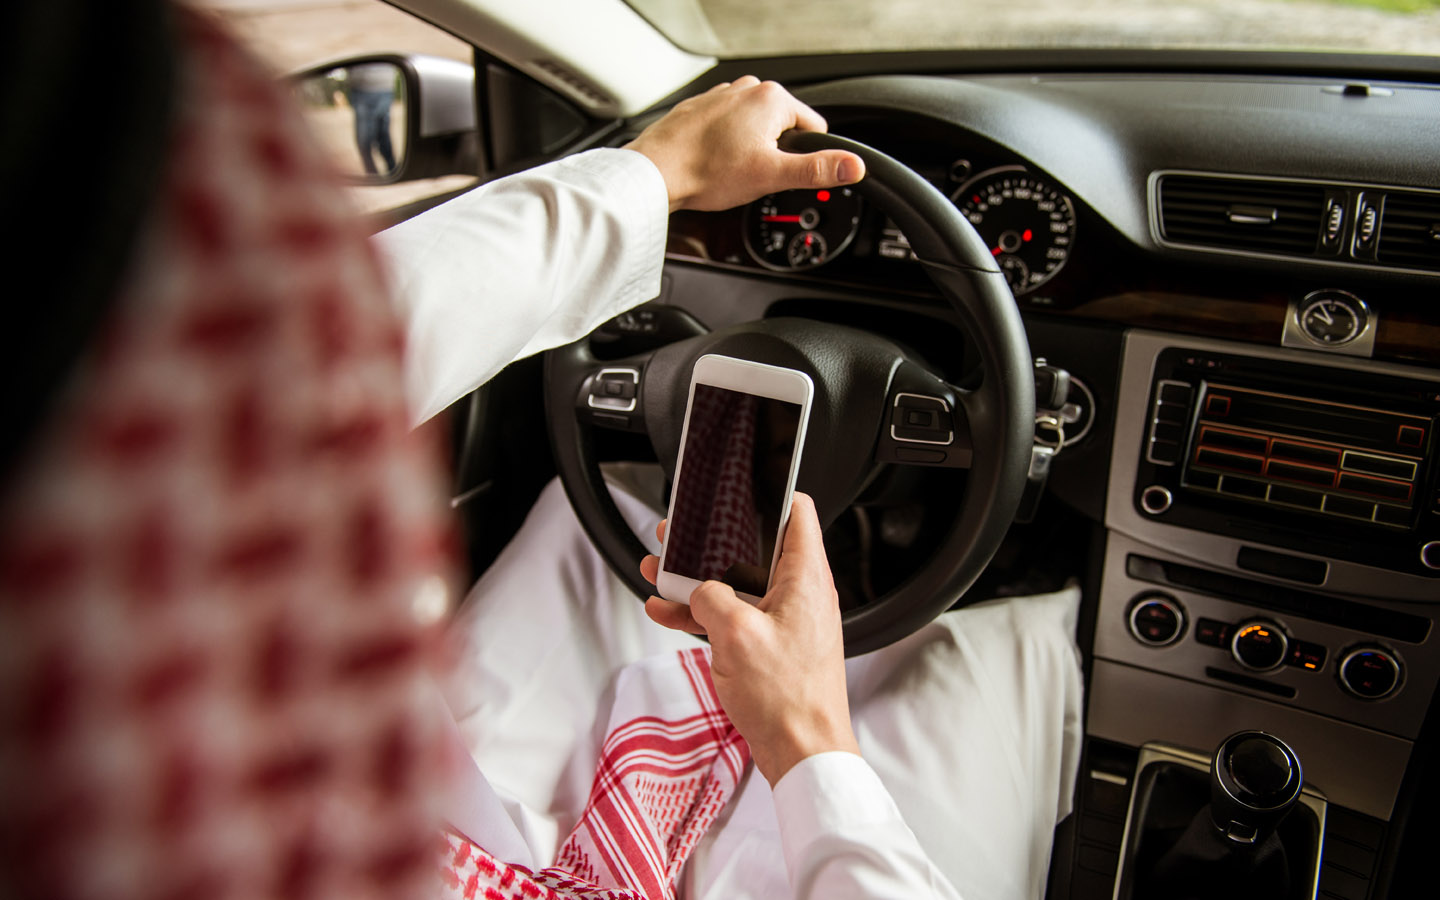 RTA Tourism Certificate required for driving outside the UAE by expats